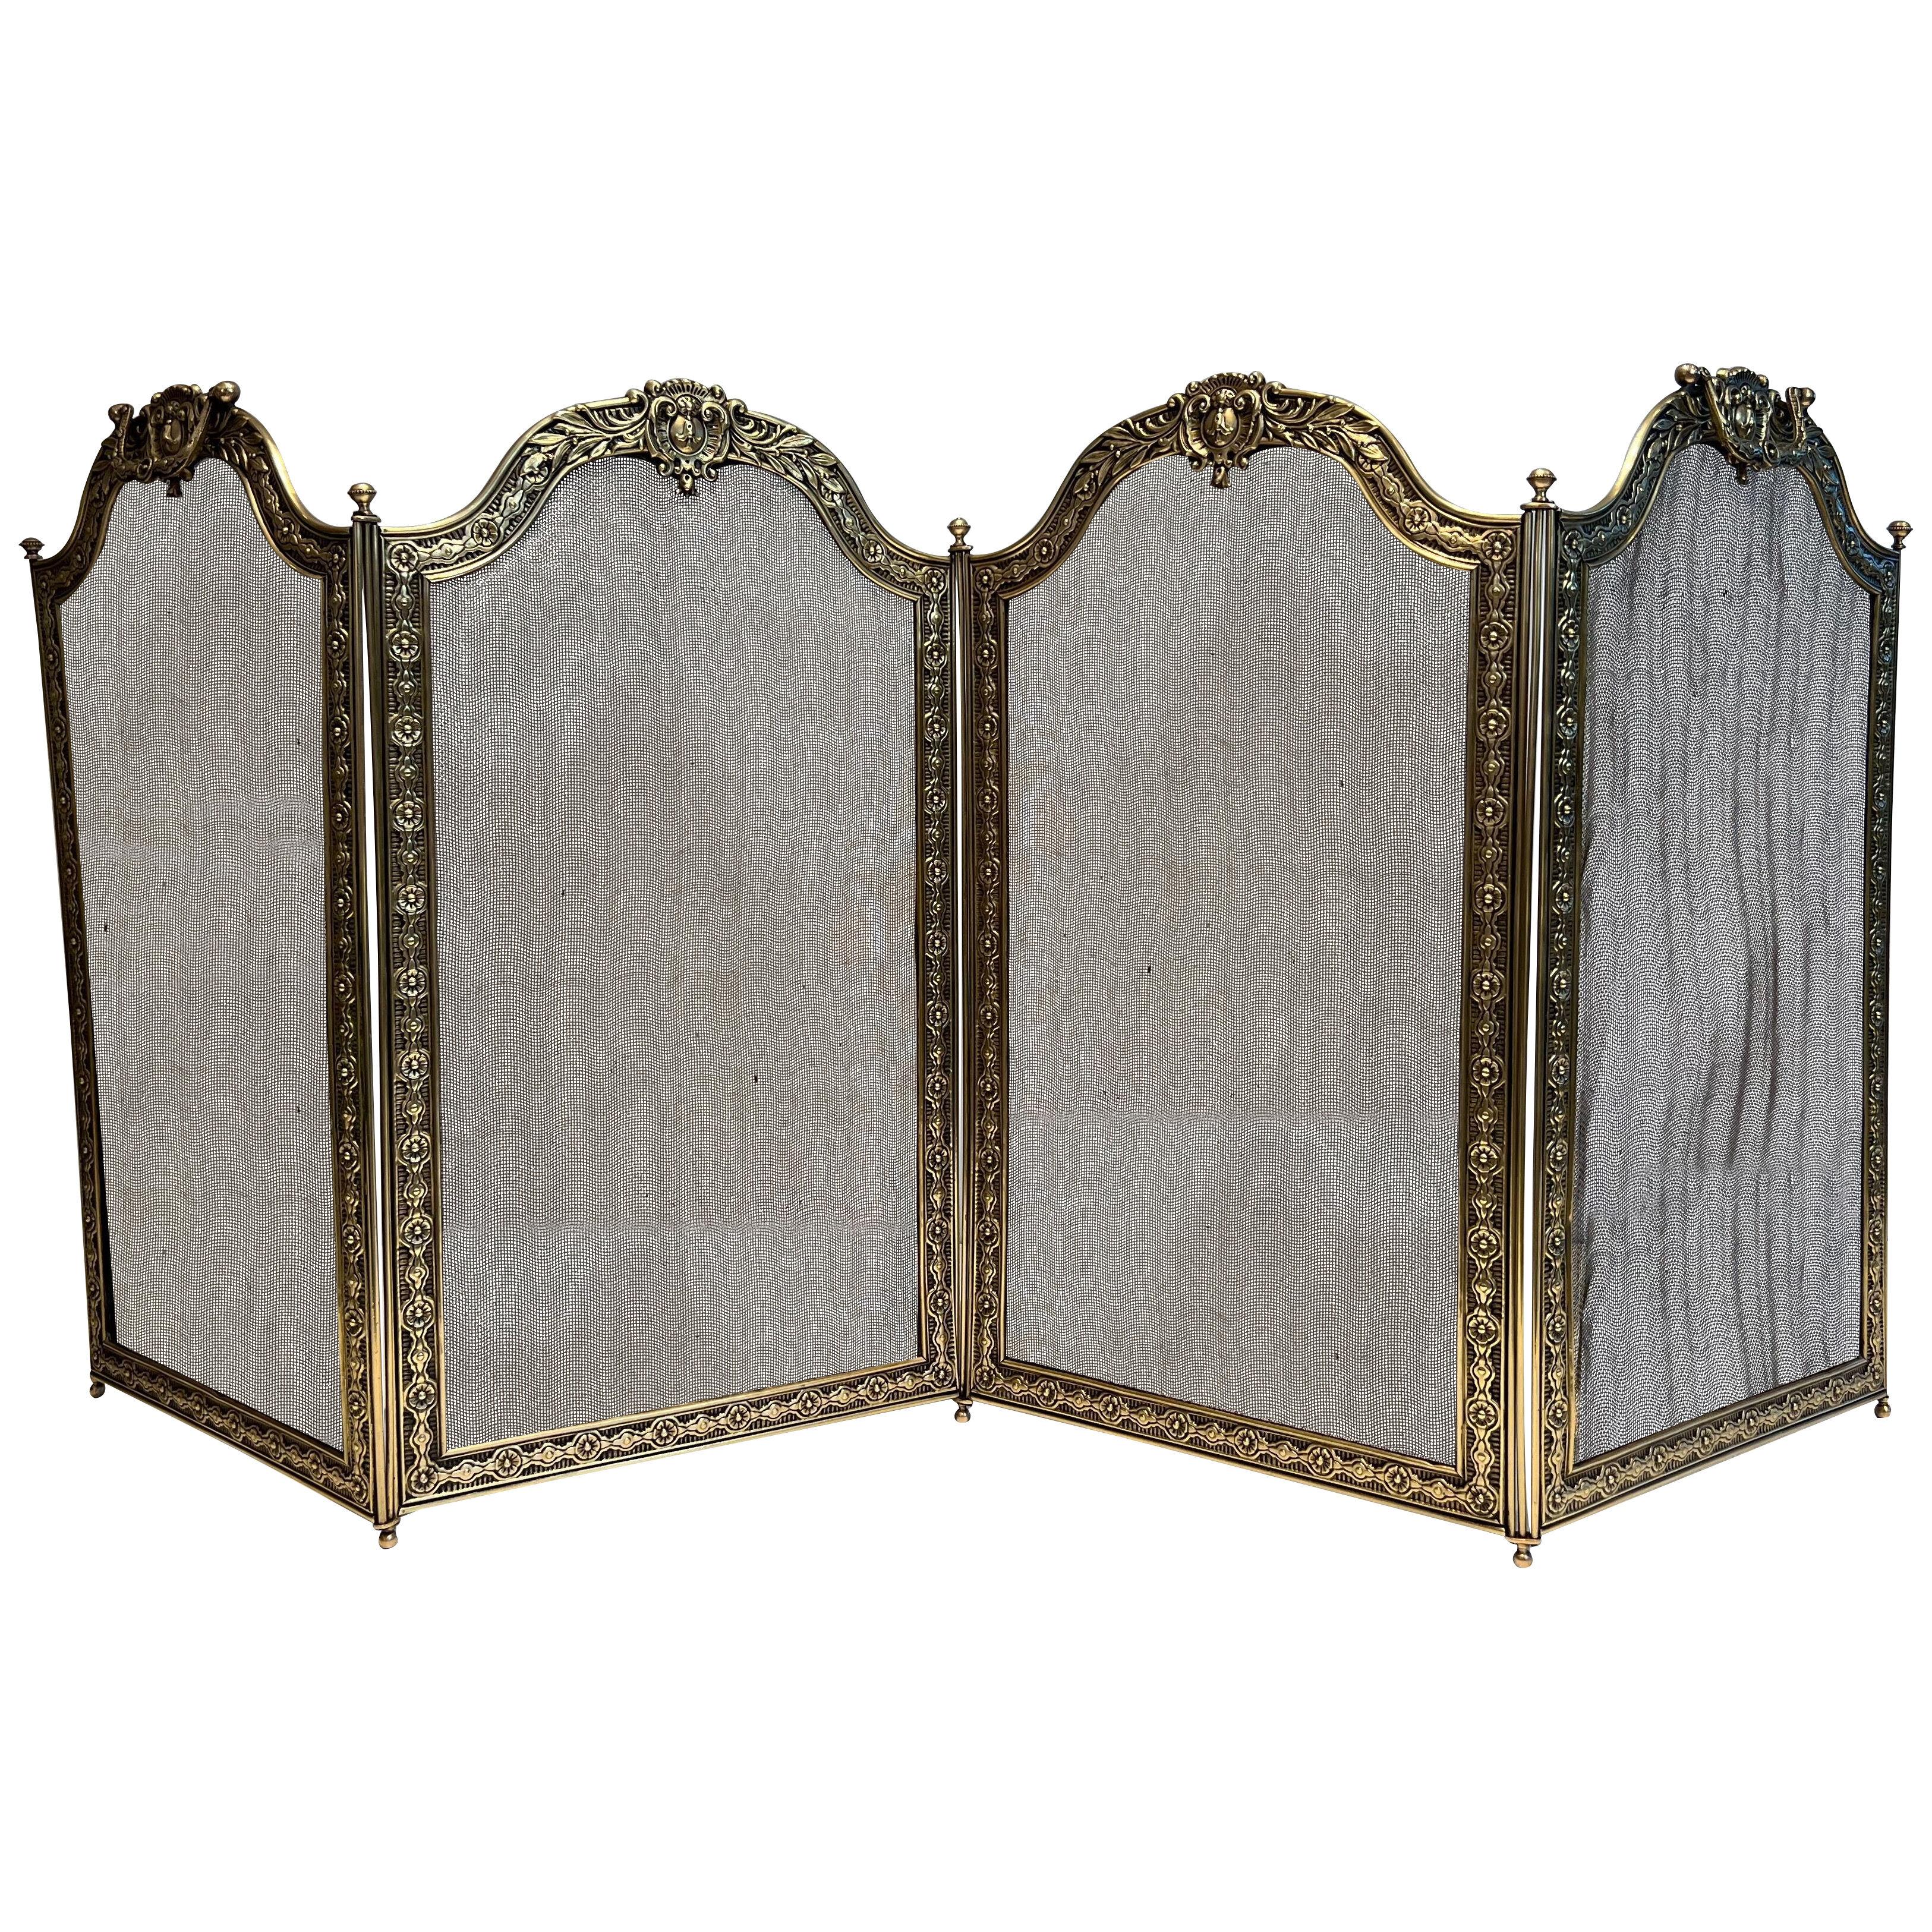 Large Louis the 16th Style 4 Panels Brass and Grilling Folding Fireplace Screen